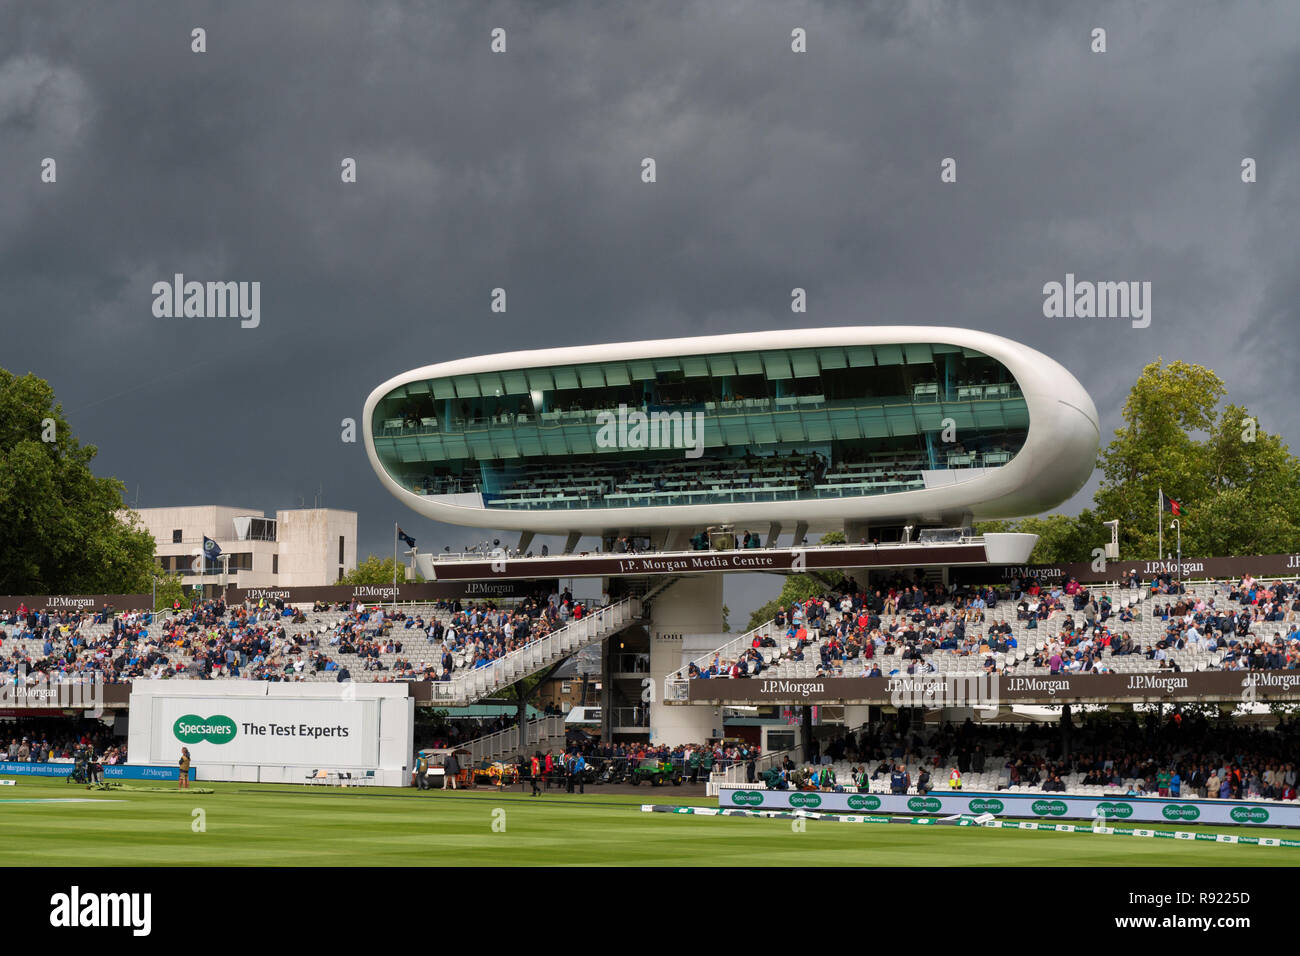 The J P Morgan Media Centre standing out against a dark stormy sky during the England v India 2018 test match at Lords. Stock Photo